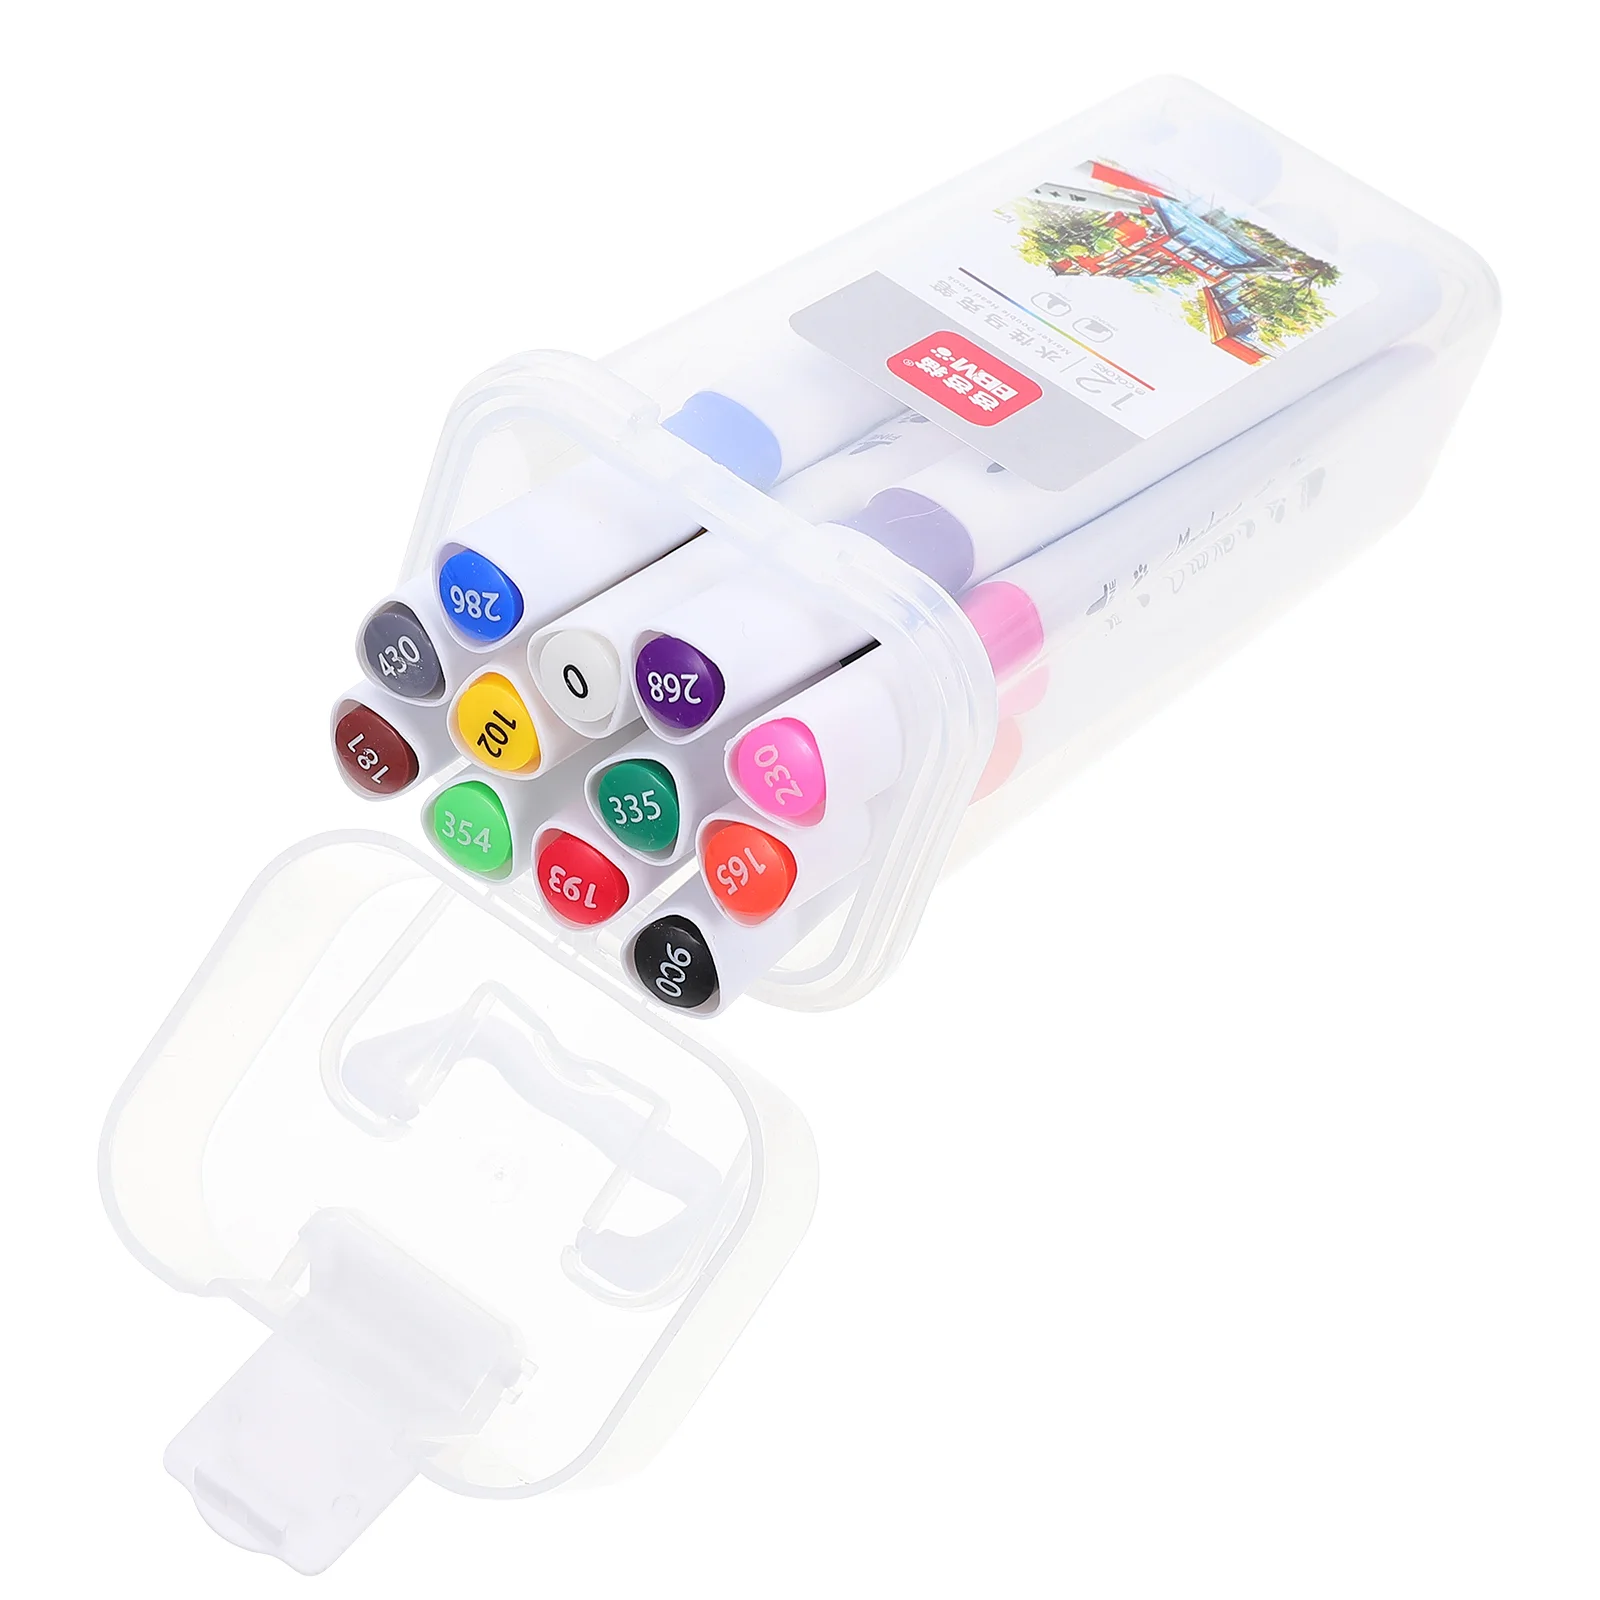 

Markers Pens Set Markerdouble Pen End Tip Dual Coloring Forart Colored Watercolor Drawingcase Painting Based Color Fine Headed